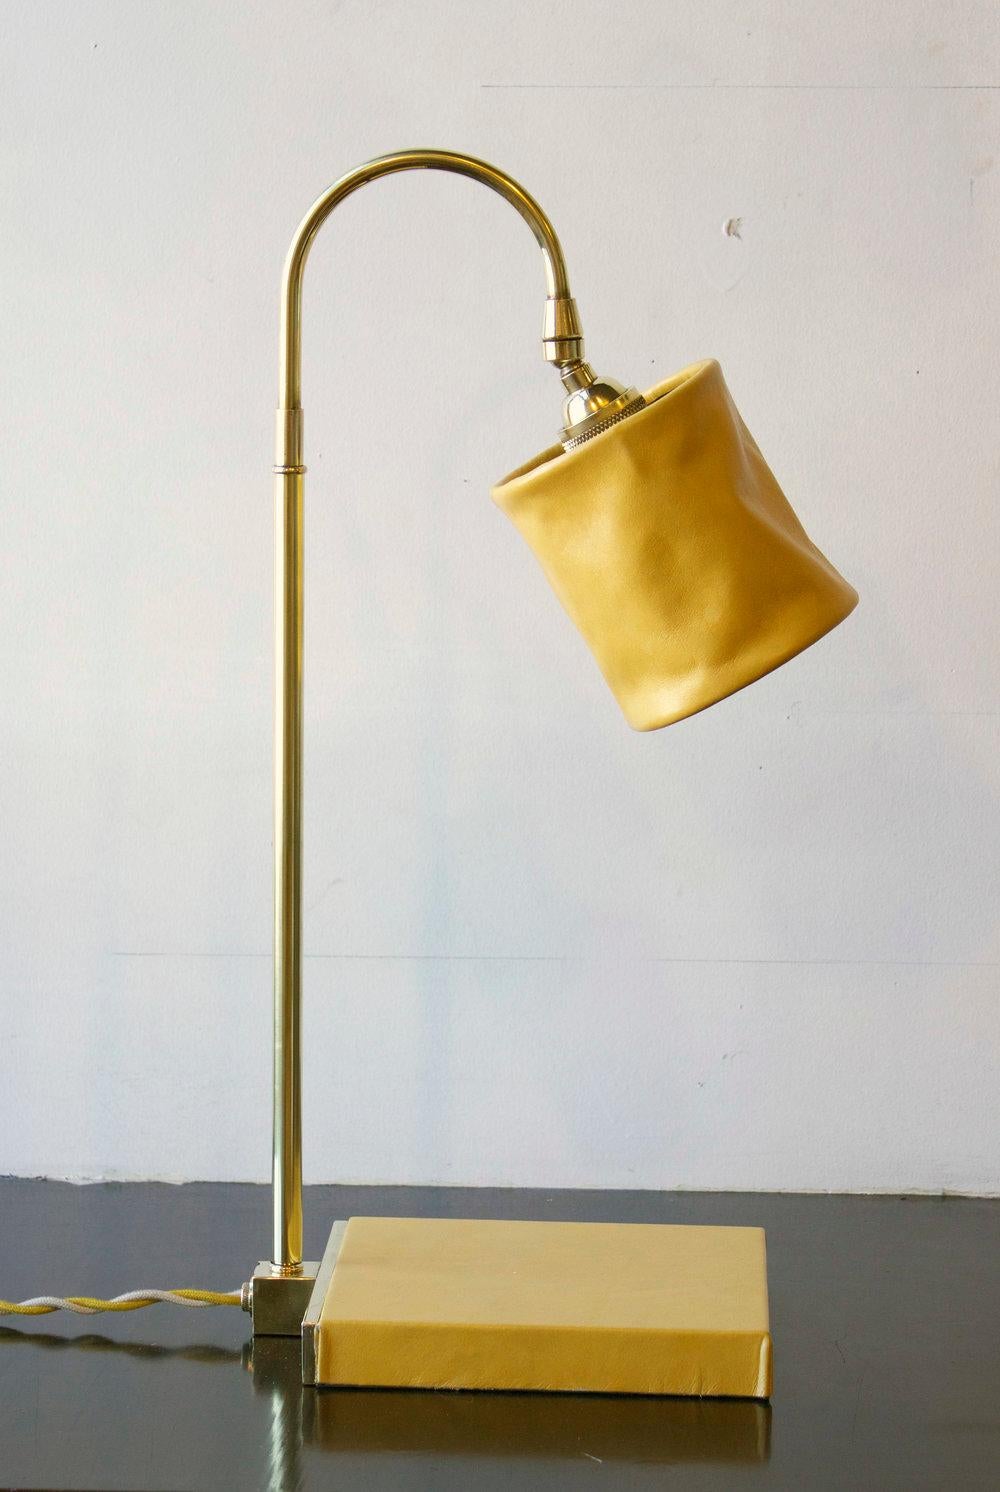 Series01 Desk Lamp, Hand-Dyed Ash 'Gray' Leather, Polished Unlacquered Brass For Sale 4